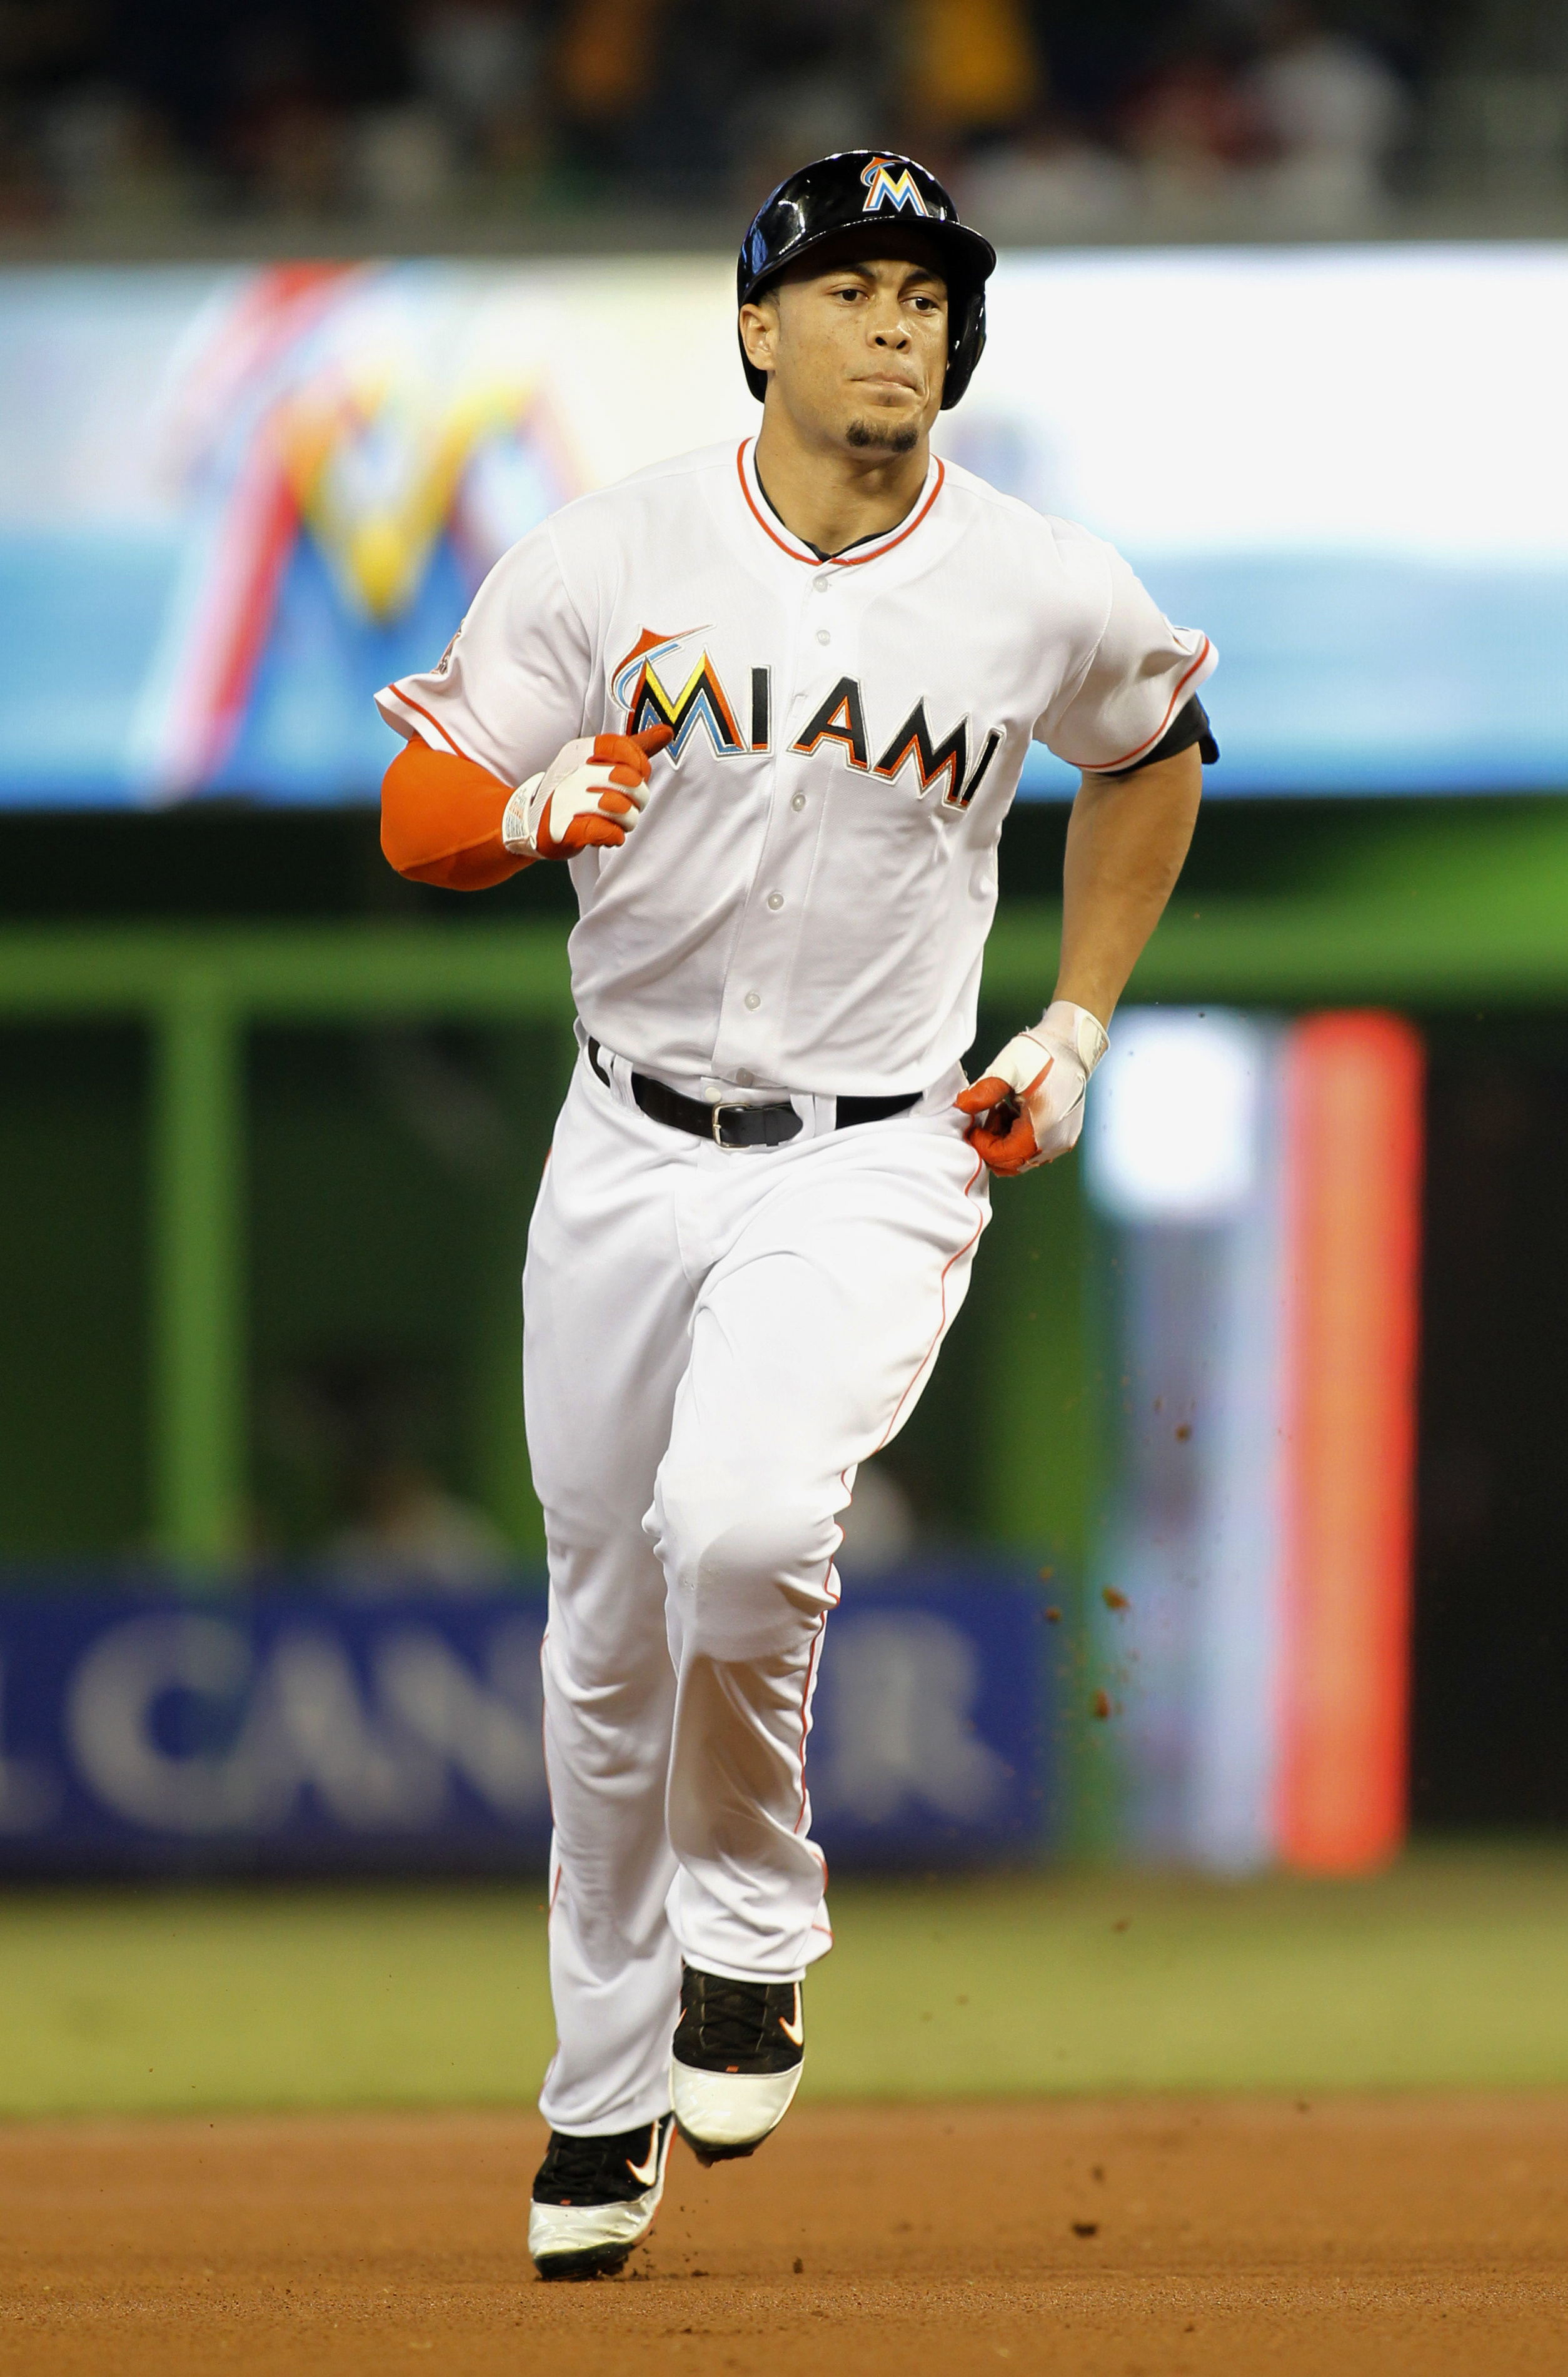 Giancarlo Stanton injury: How does this affect the 2013 Miami